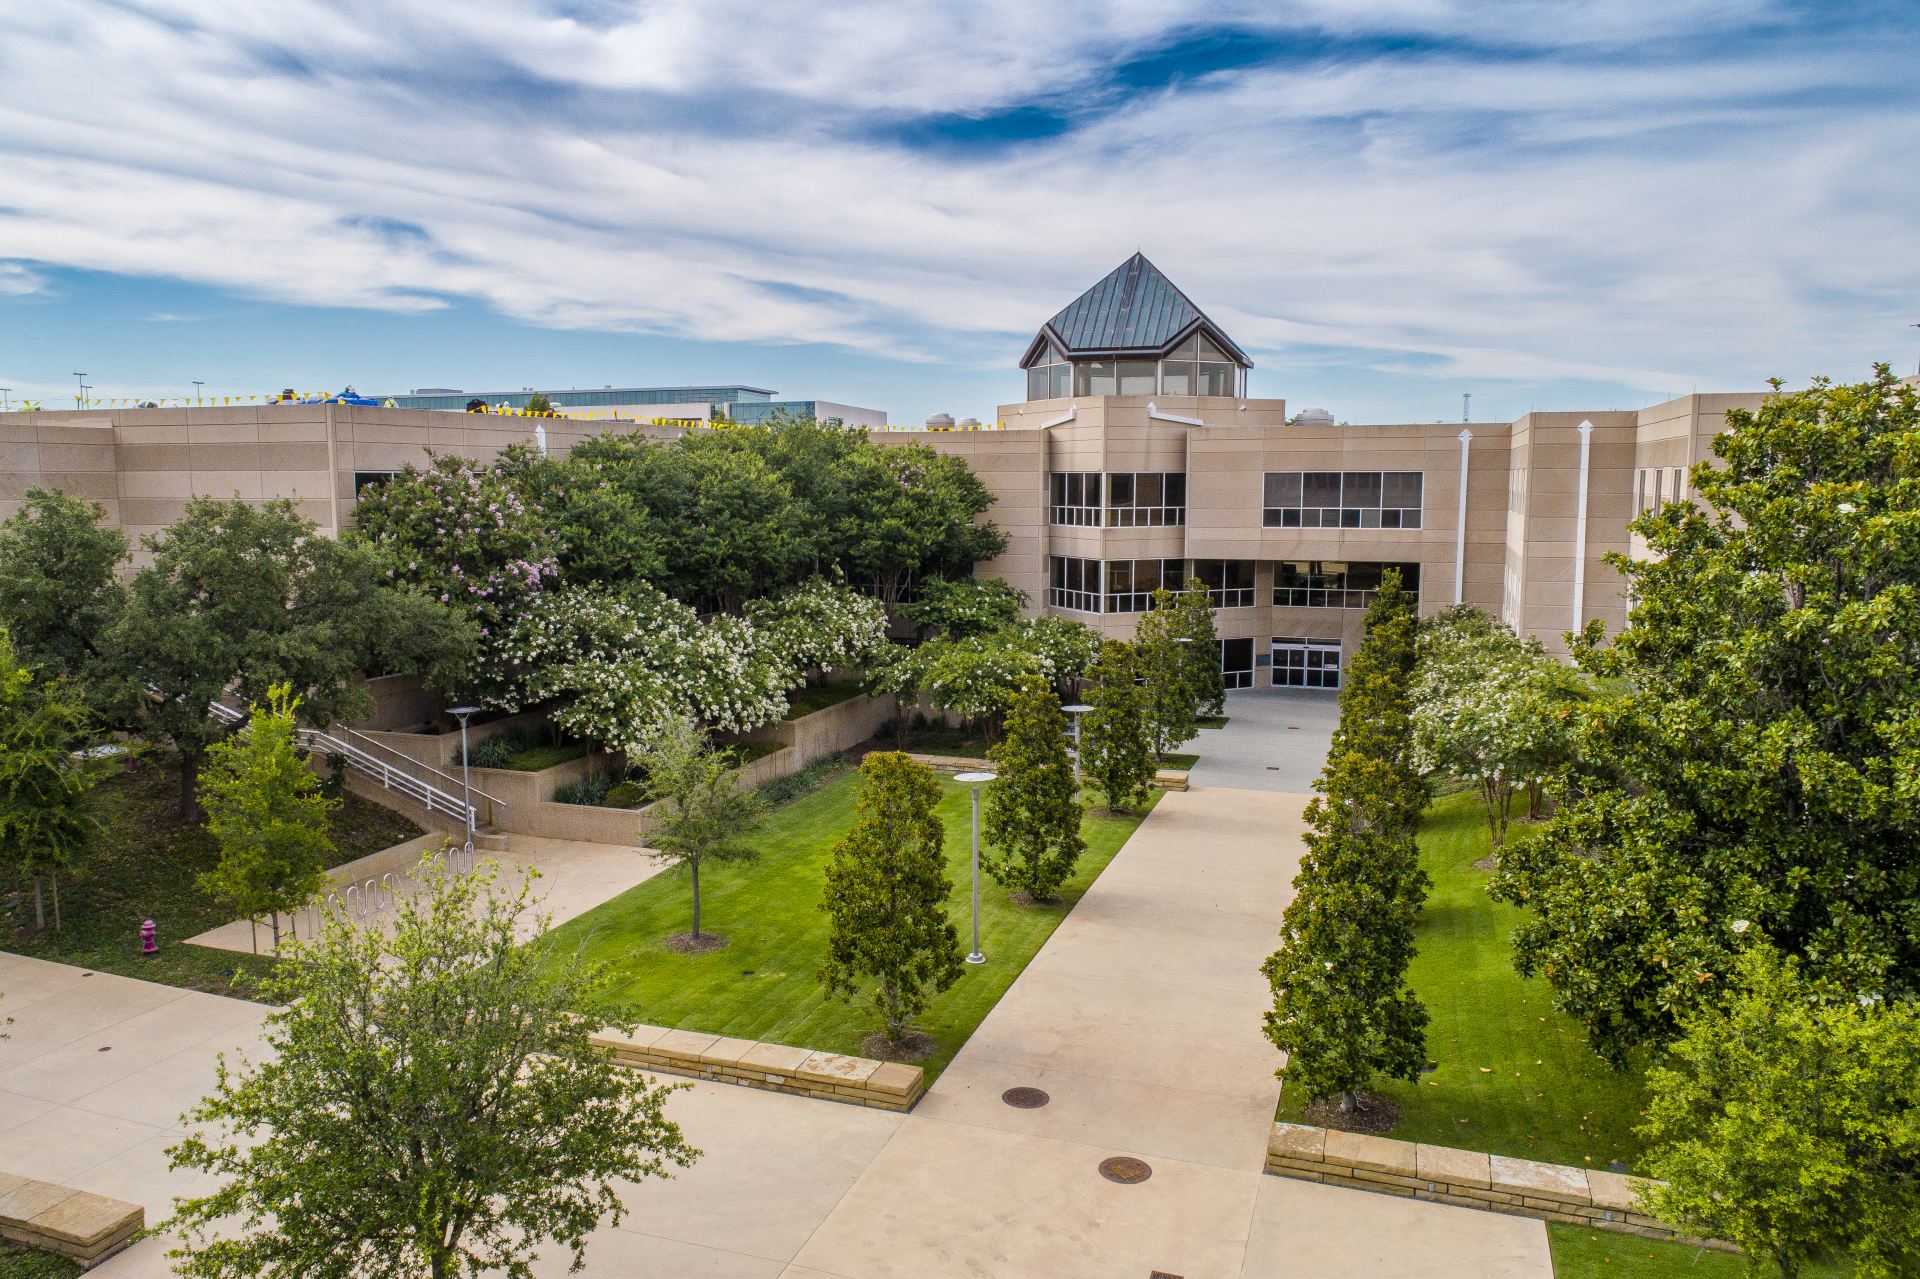 Landscape picture of the University of Texas at Dallas Administration Building.